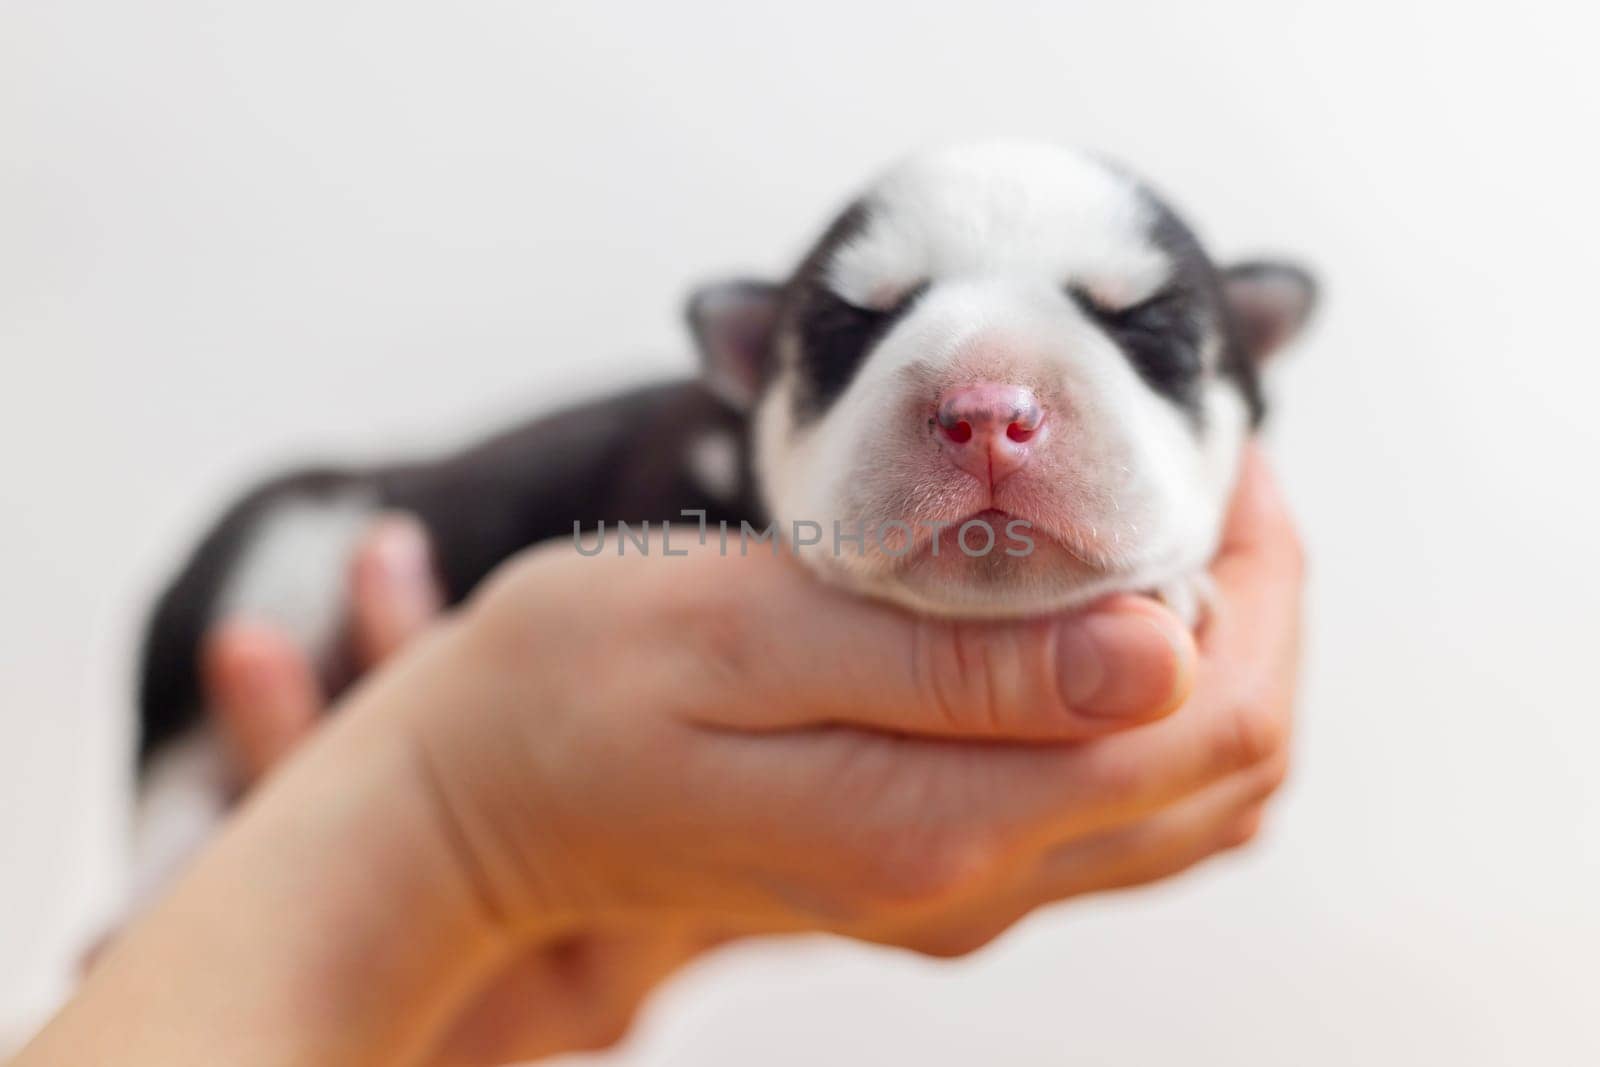 Person holding a newborn puppy in their hands against white by andreyz